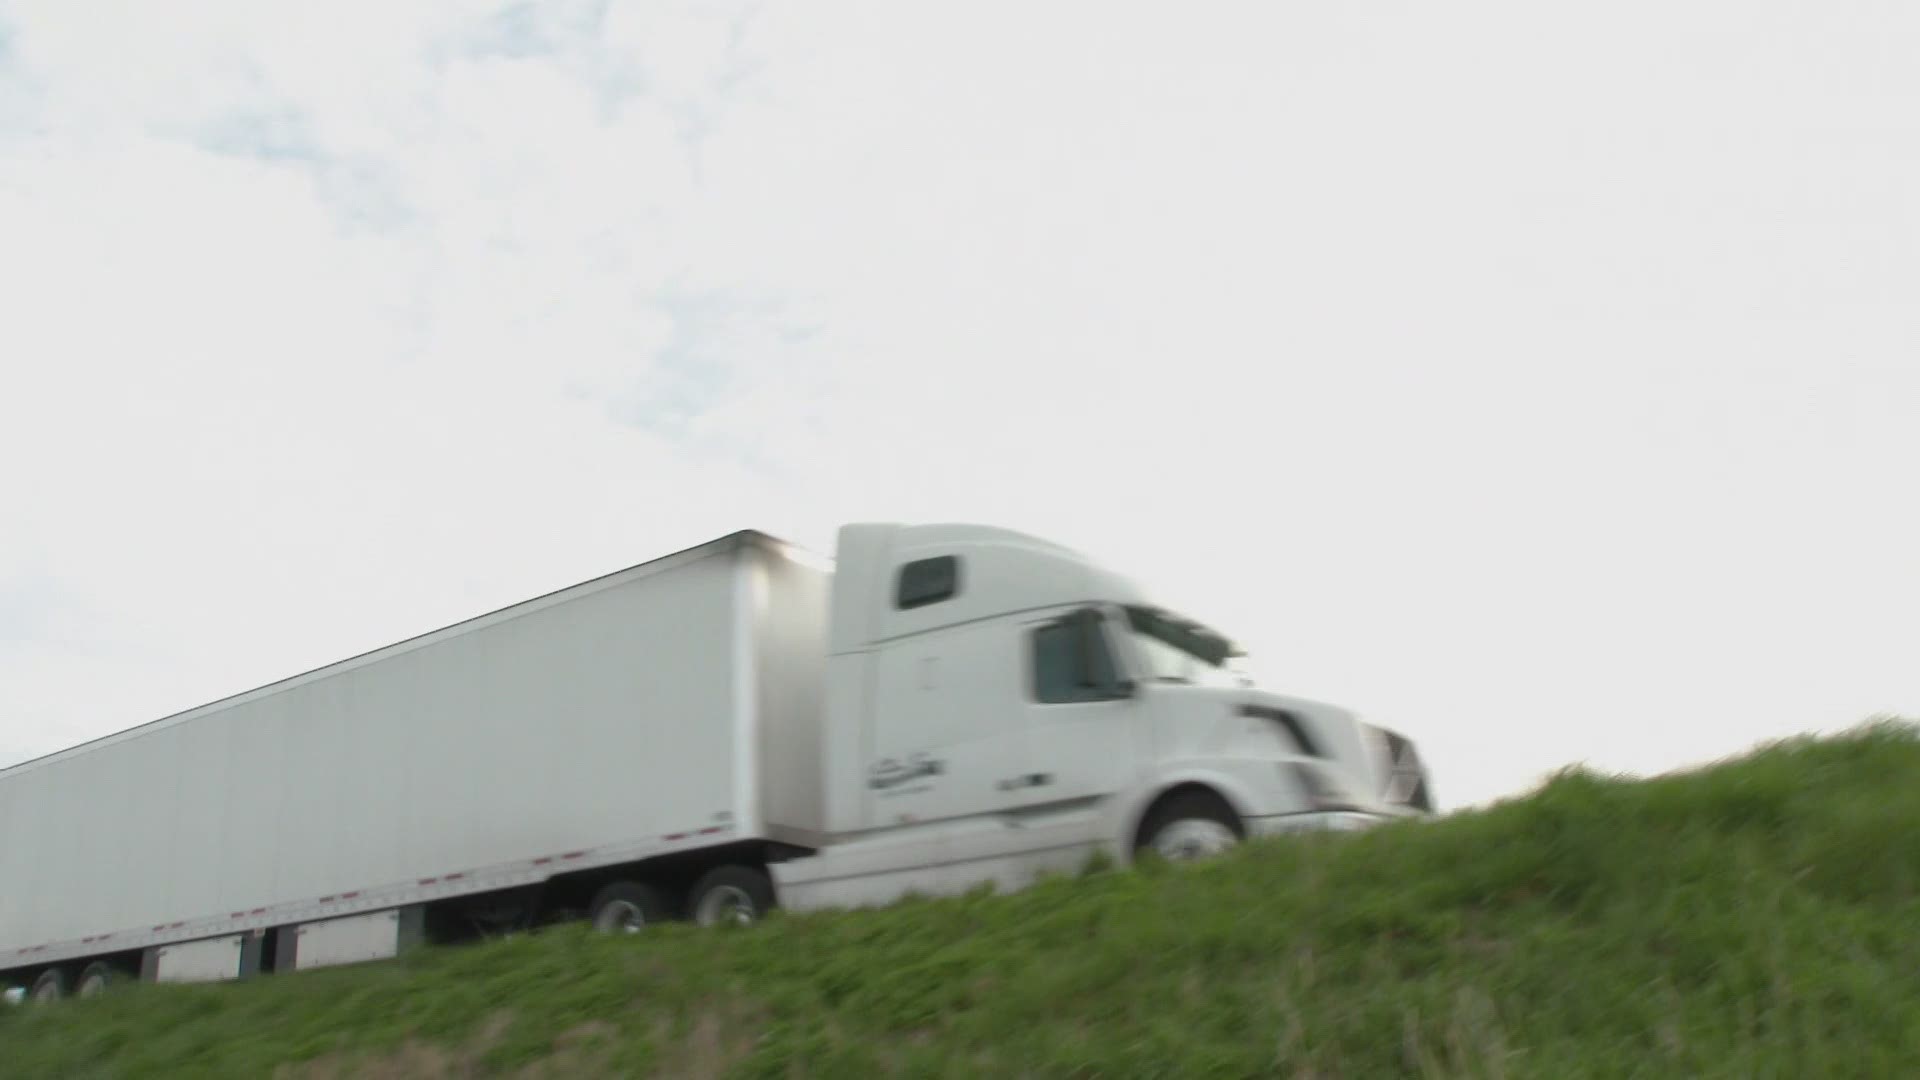 Nationally, there is a shortage of truck drivers. A West Michigan driving school says that only increased during the pandemic, as more people ordered items online.